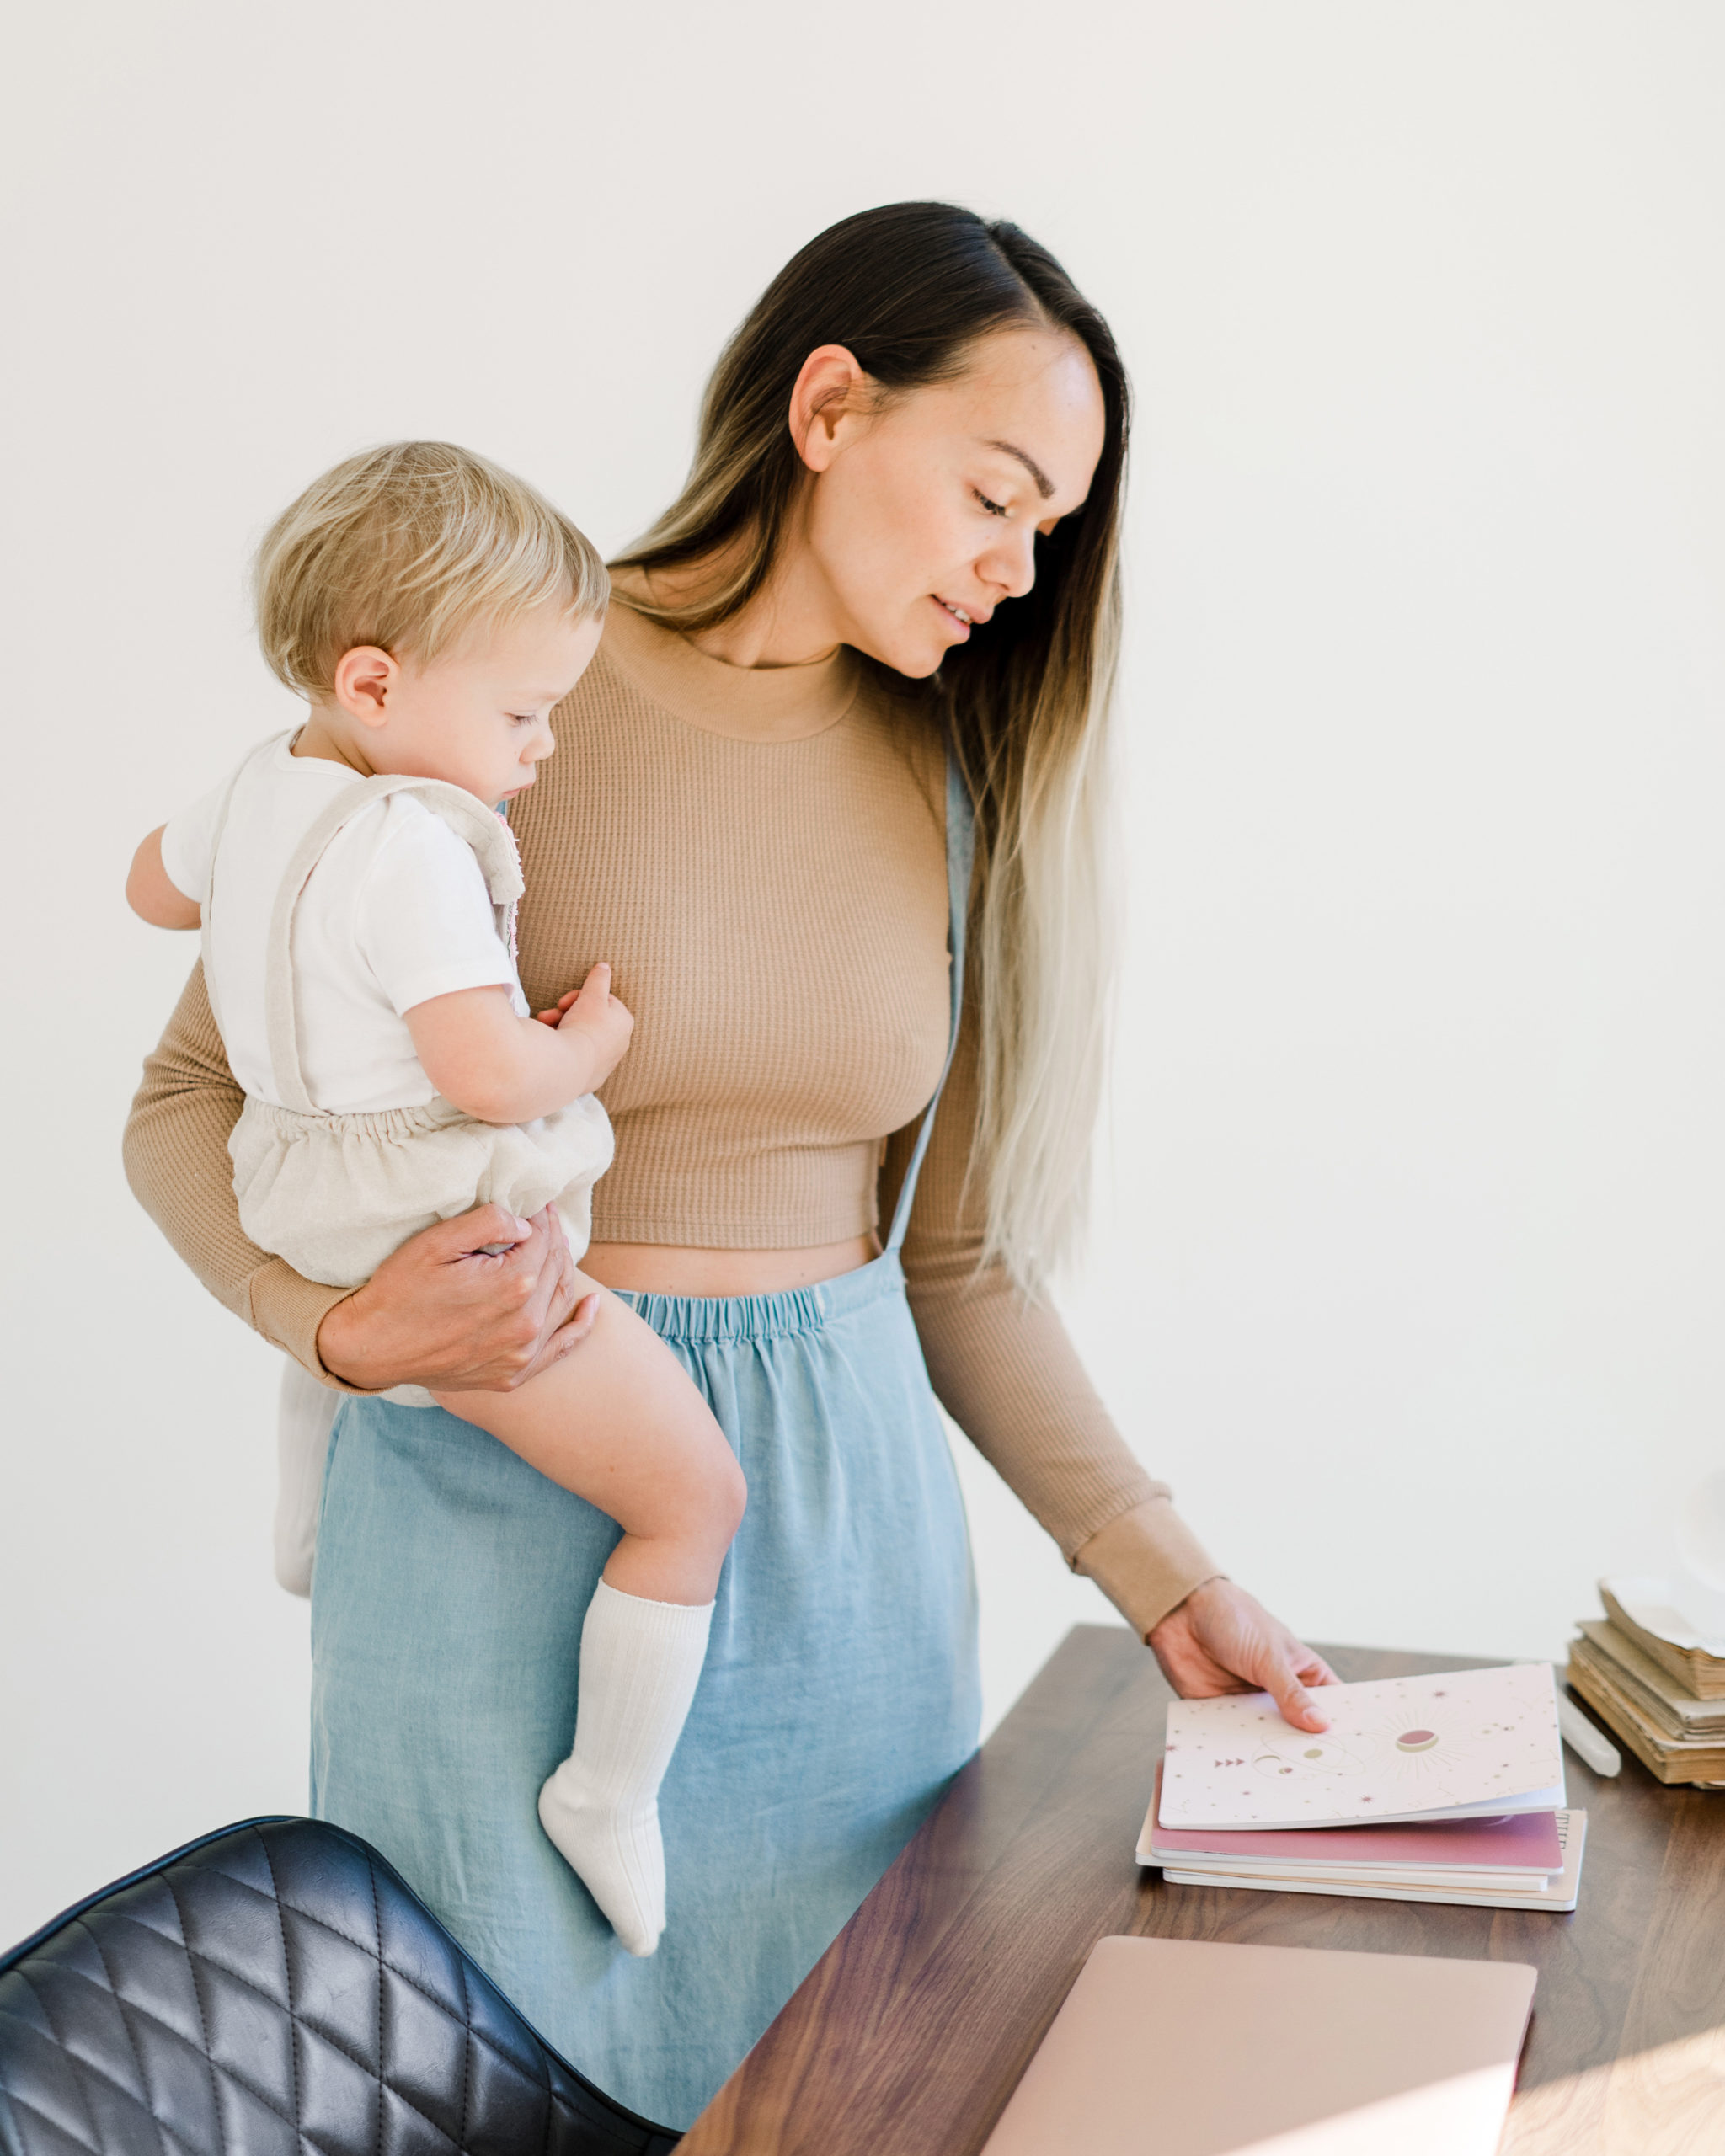 7 tips to being more productive as a business mom. www.iammichellegifford.com